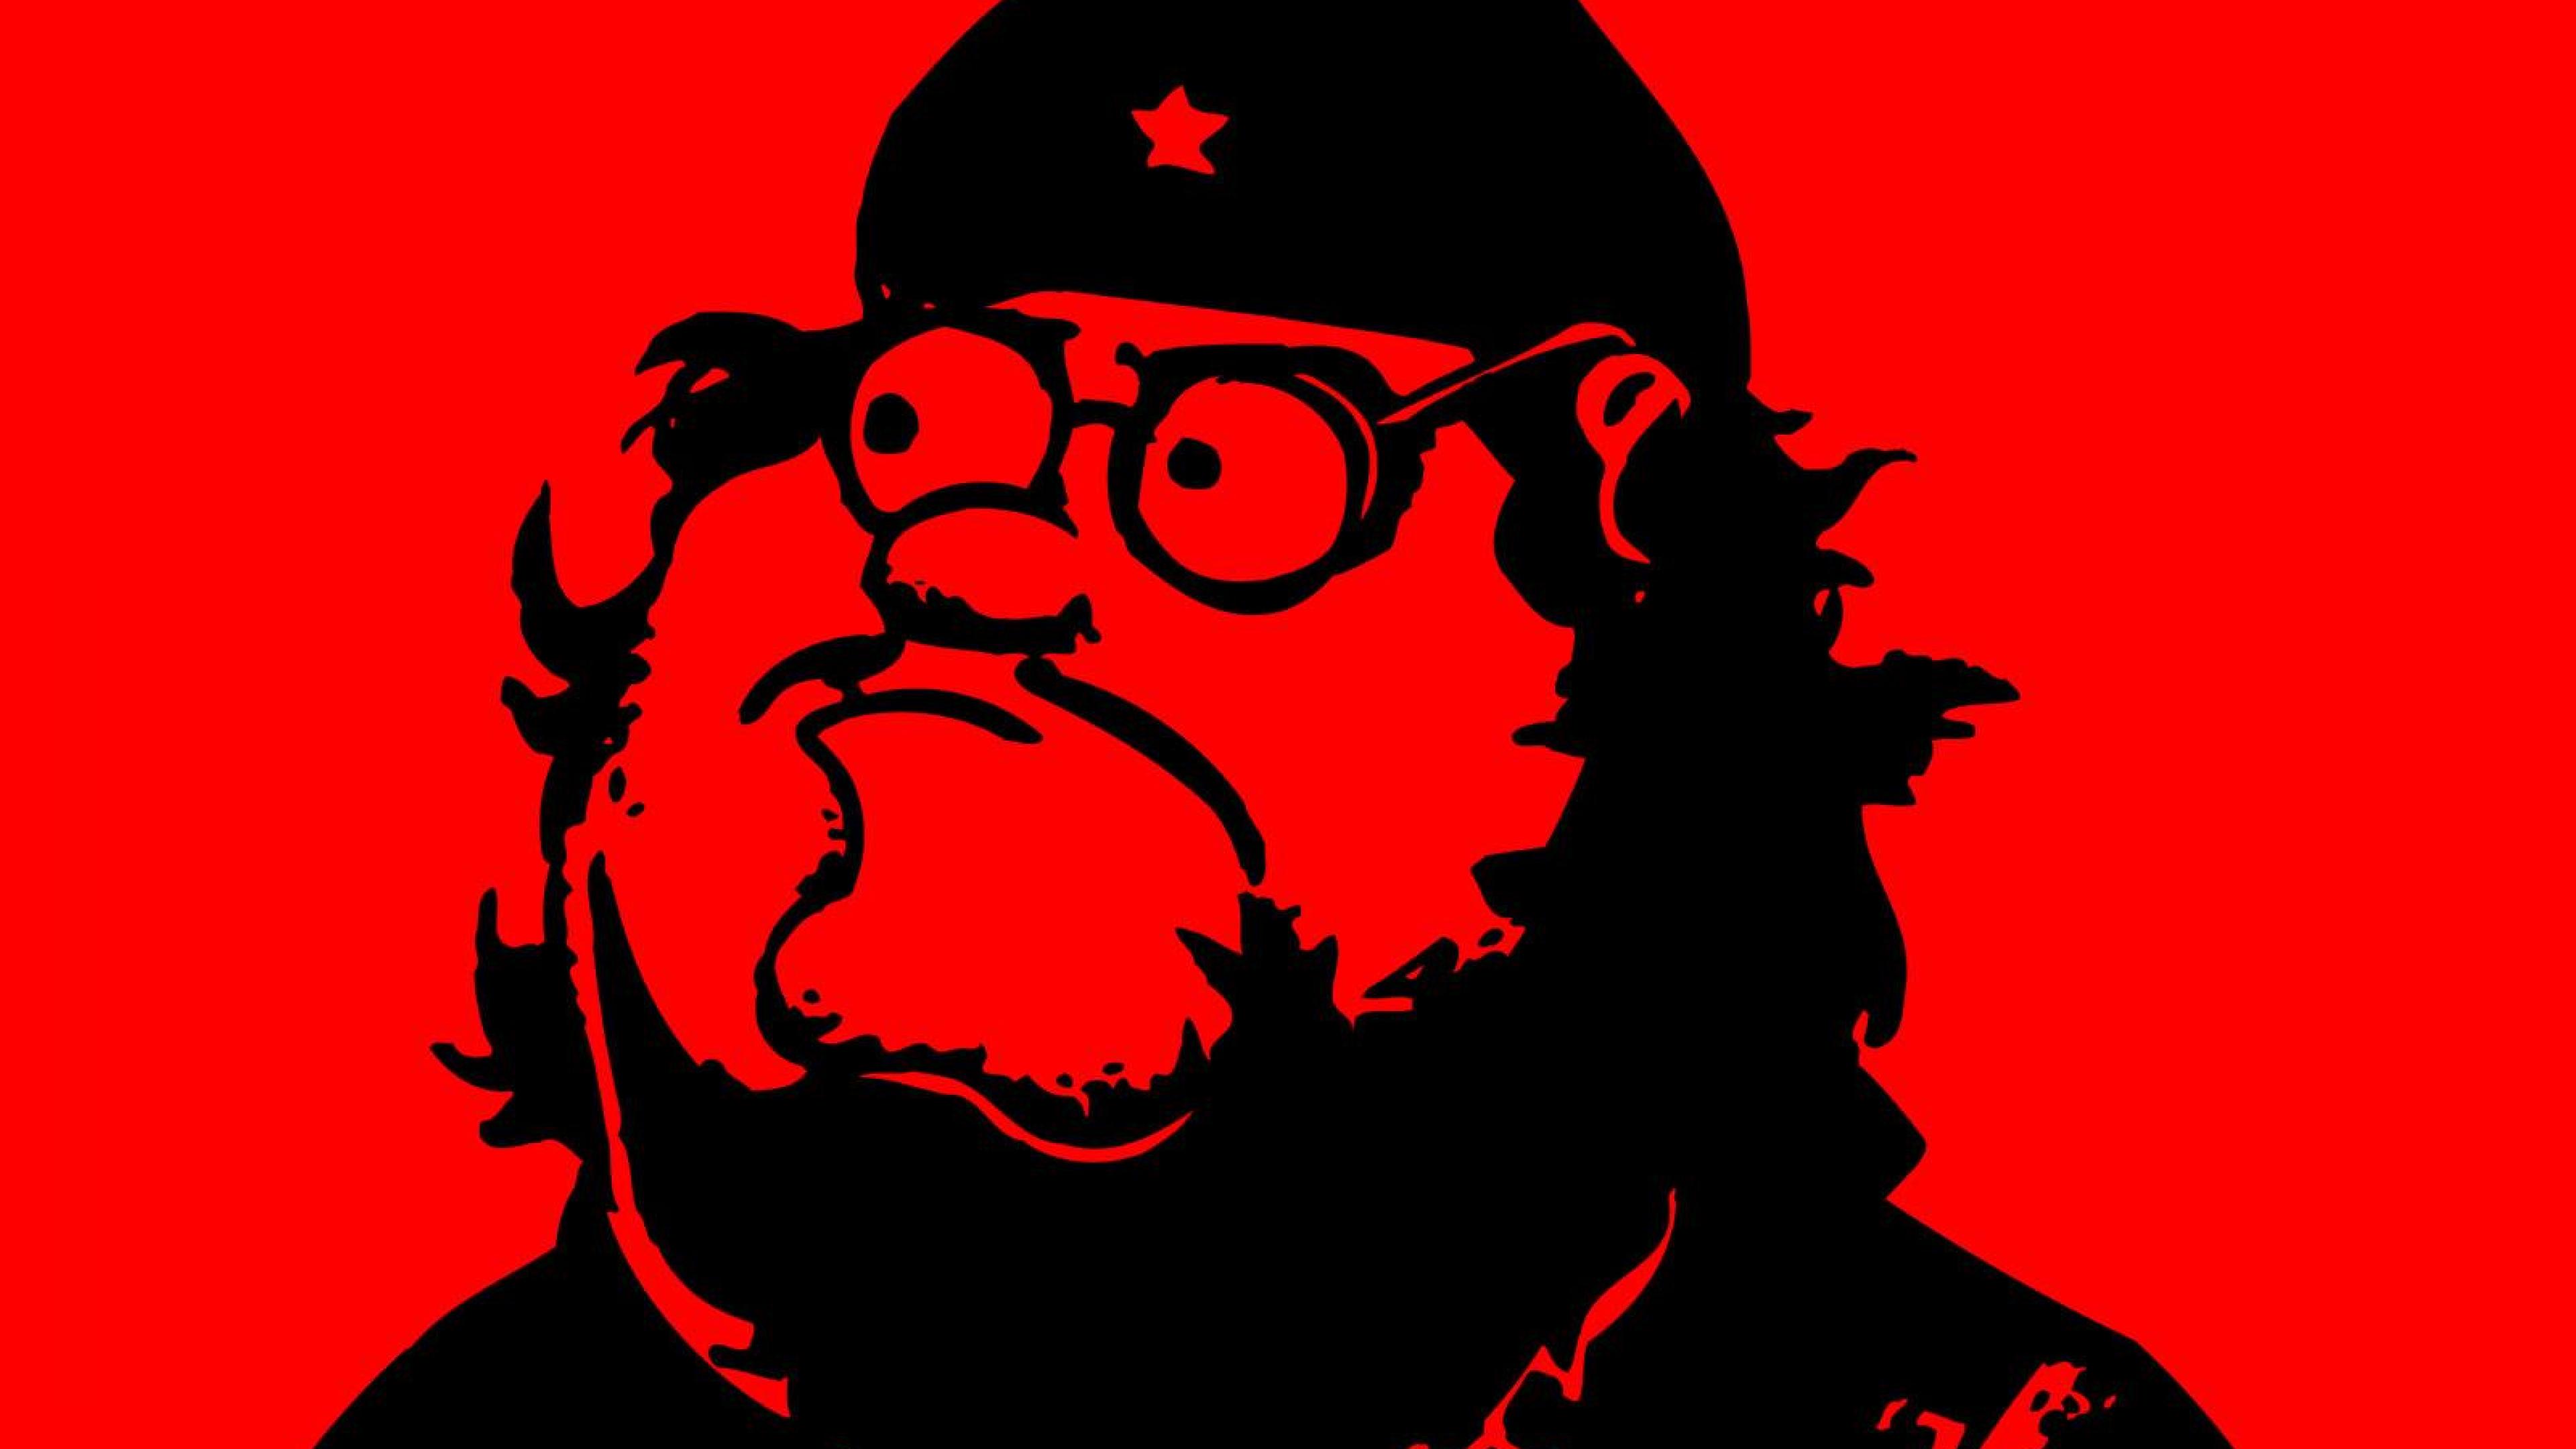 Peter Griffin as Che Guevara - creezi